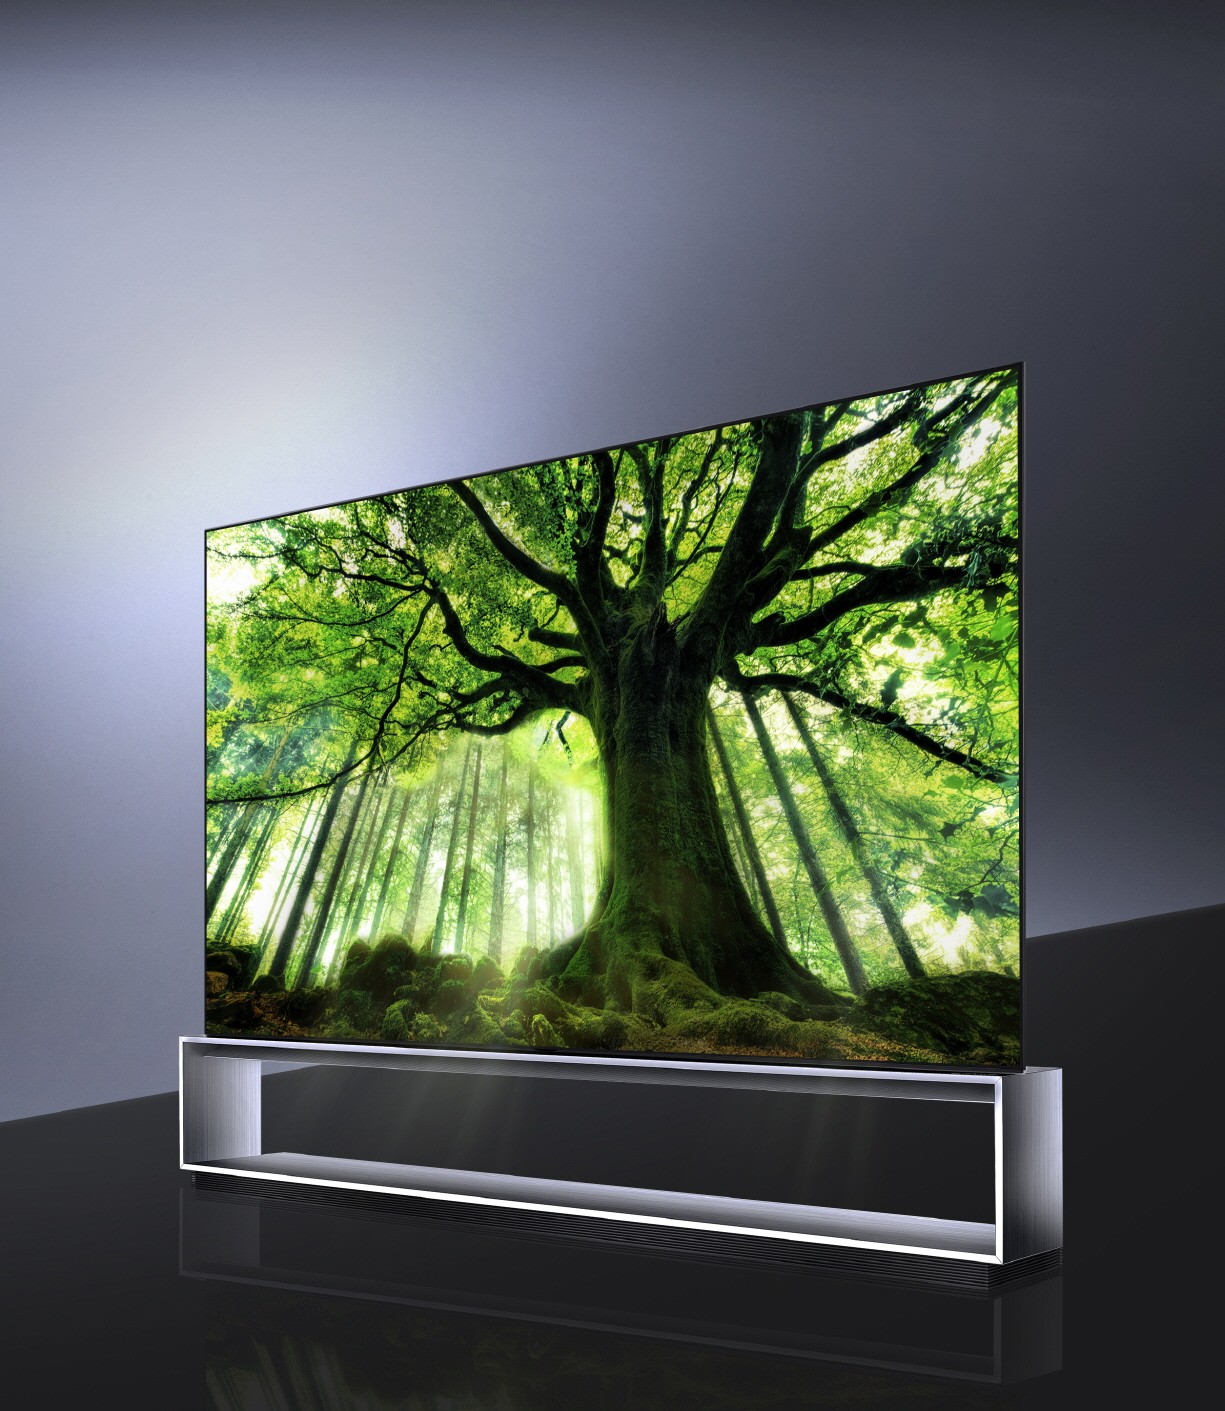 A right-side view of LG SIGNATURE OLED 8K TV model 88Z9 showing a tall tree